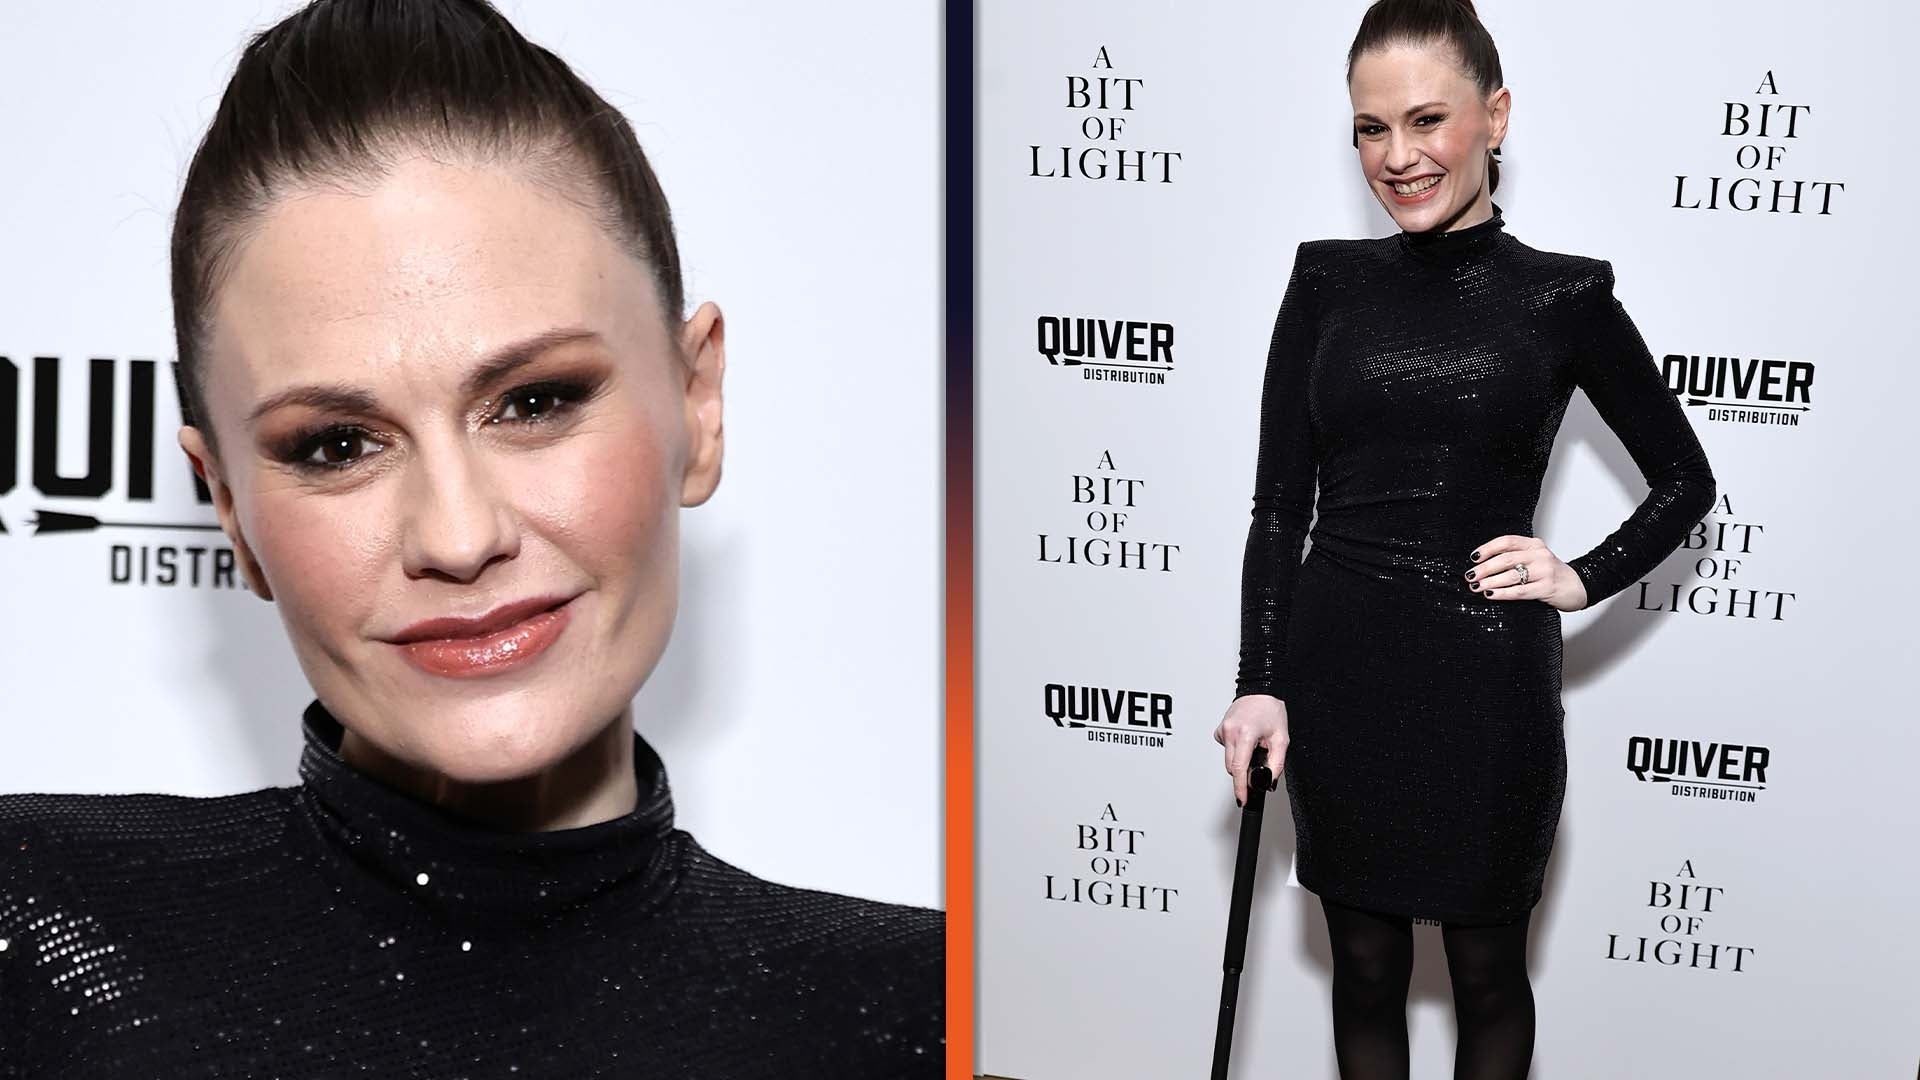 Anna Paquin Using a Cane as She Battles Mystery Illness (Source)